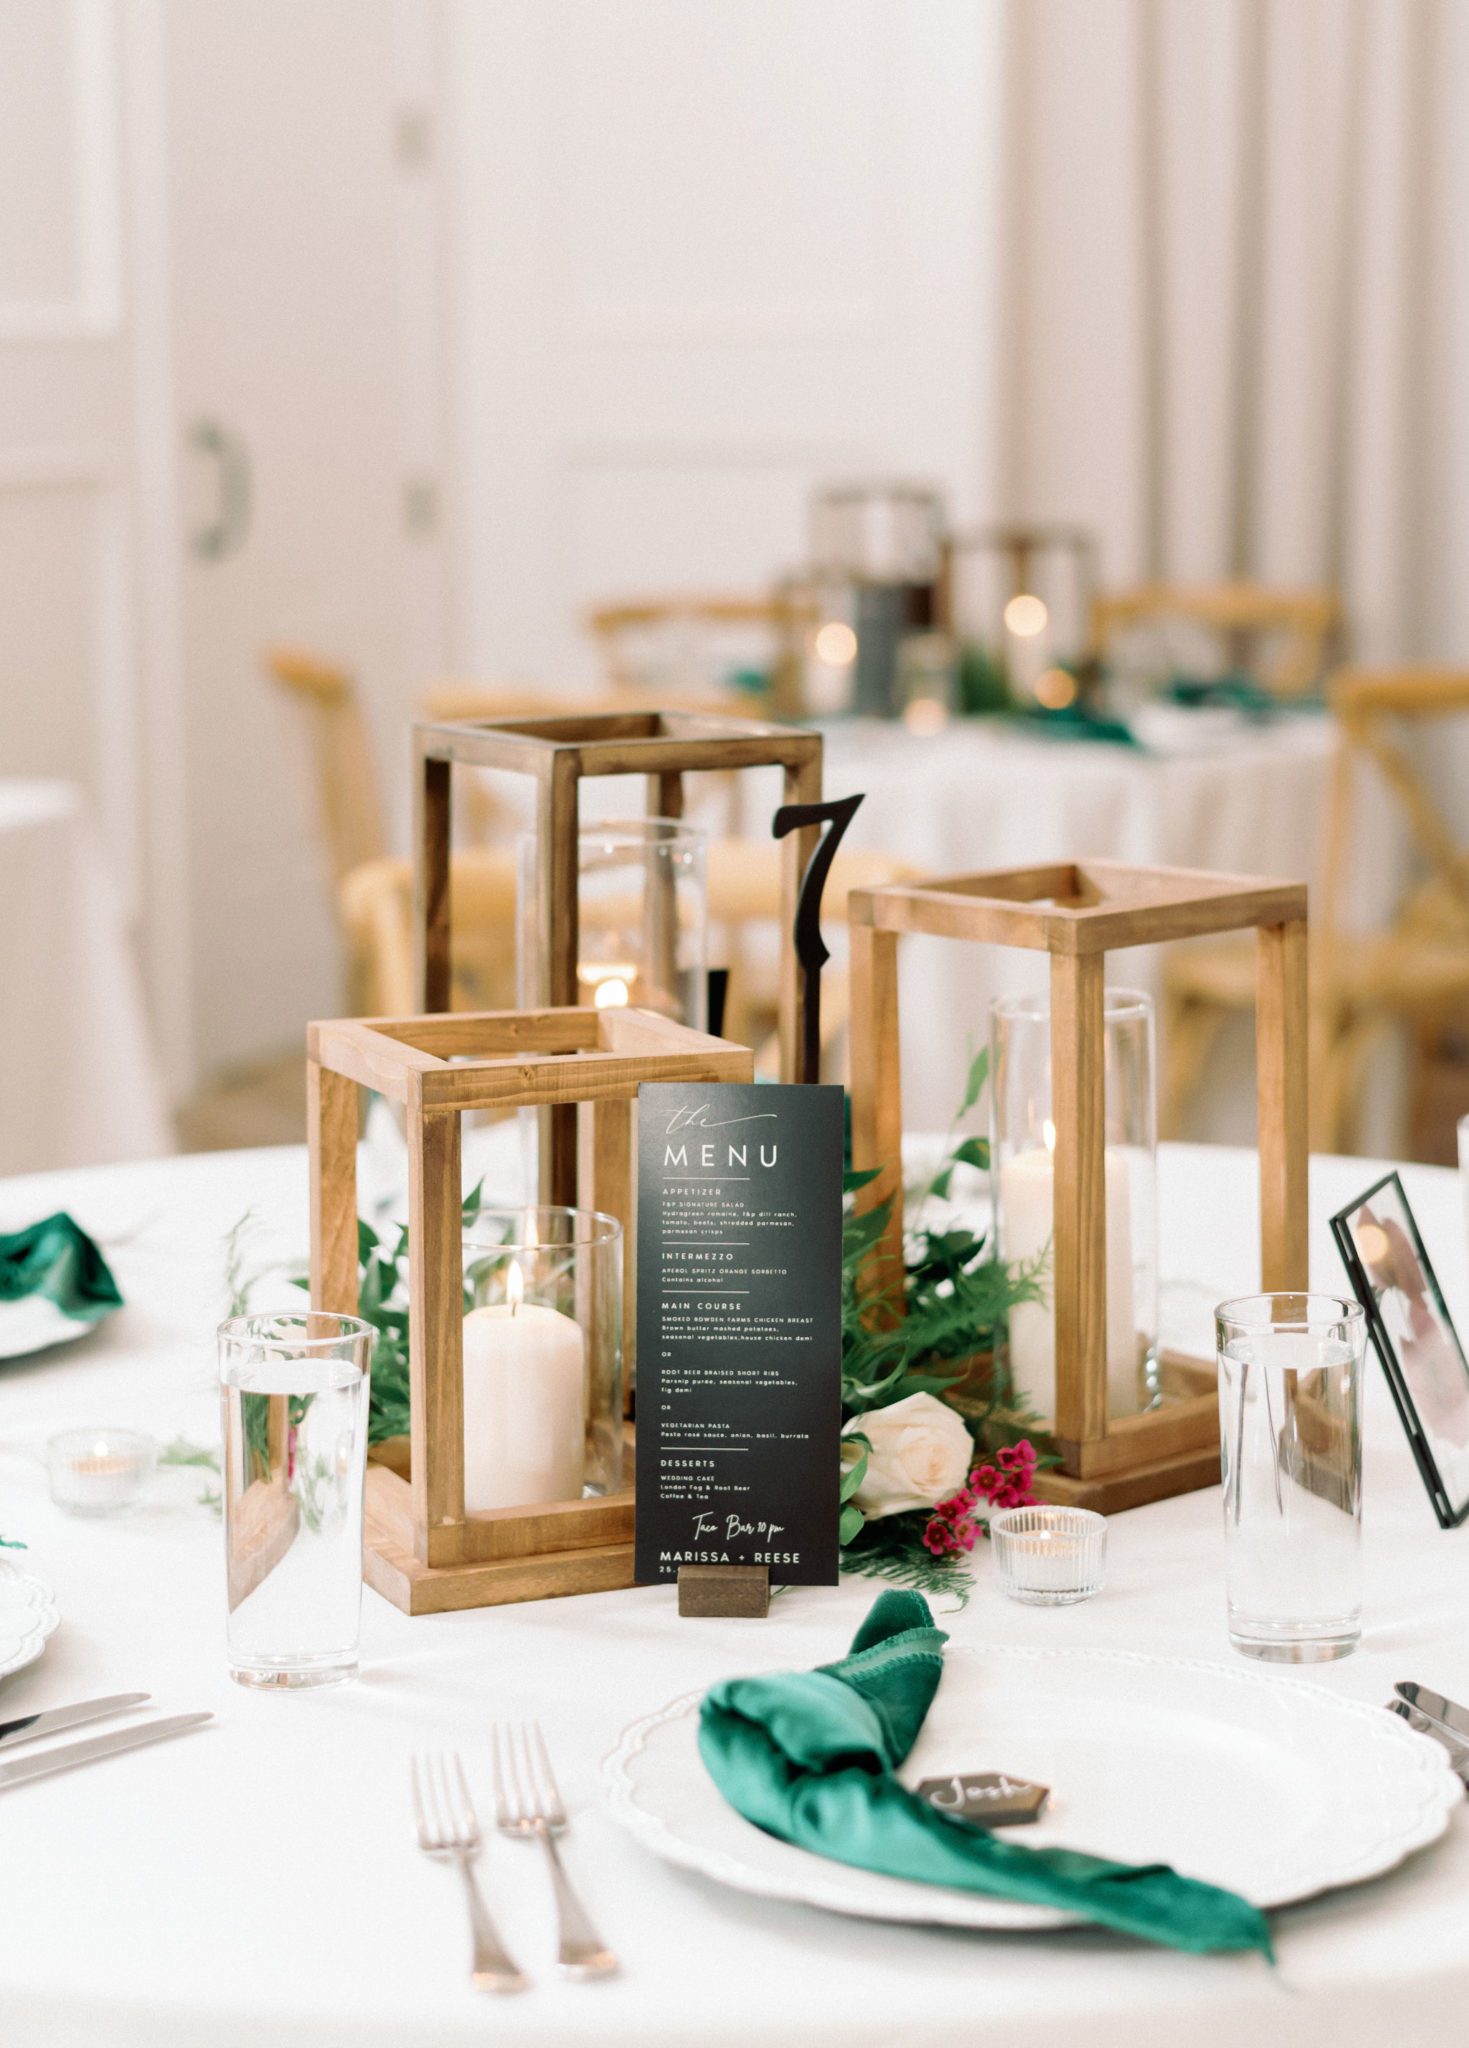 candlelit wedding centrepieces, wedding table with wood lantern centerpieces and a black table menu, green velvet napkins